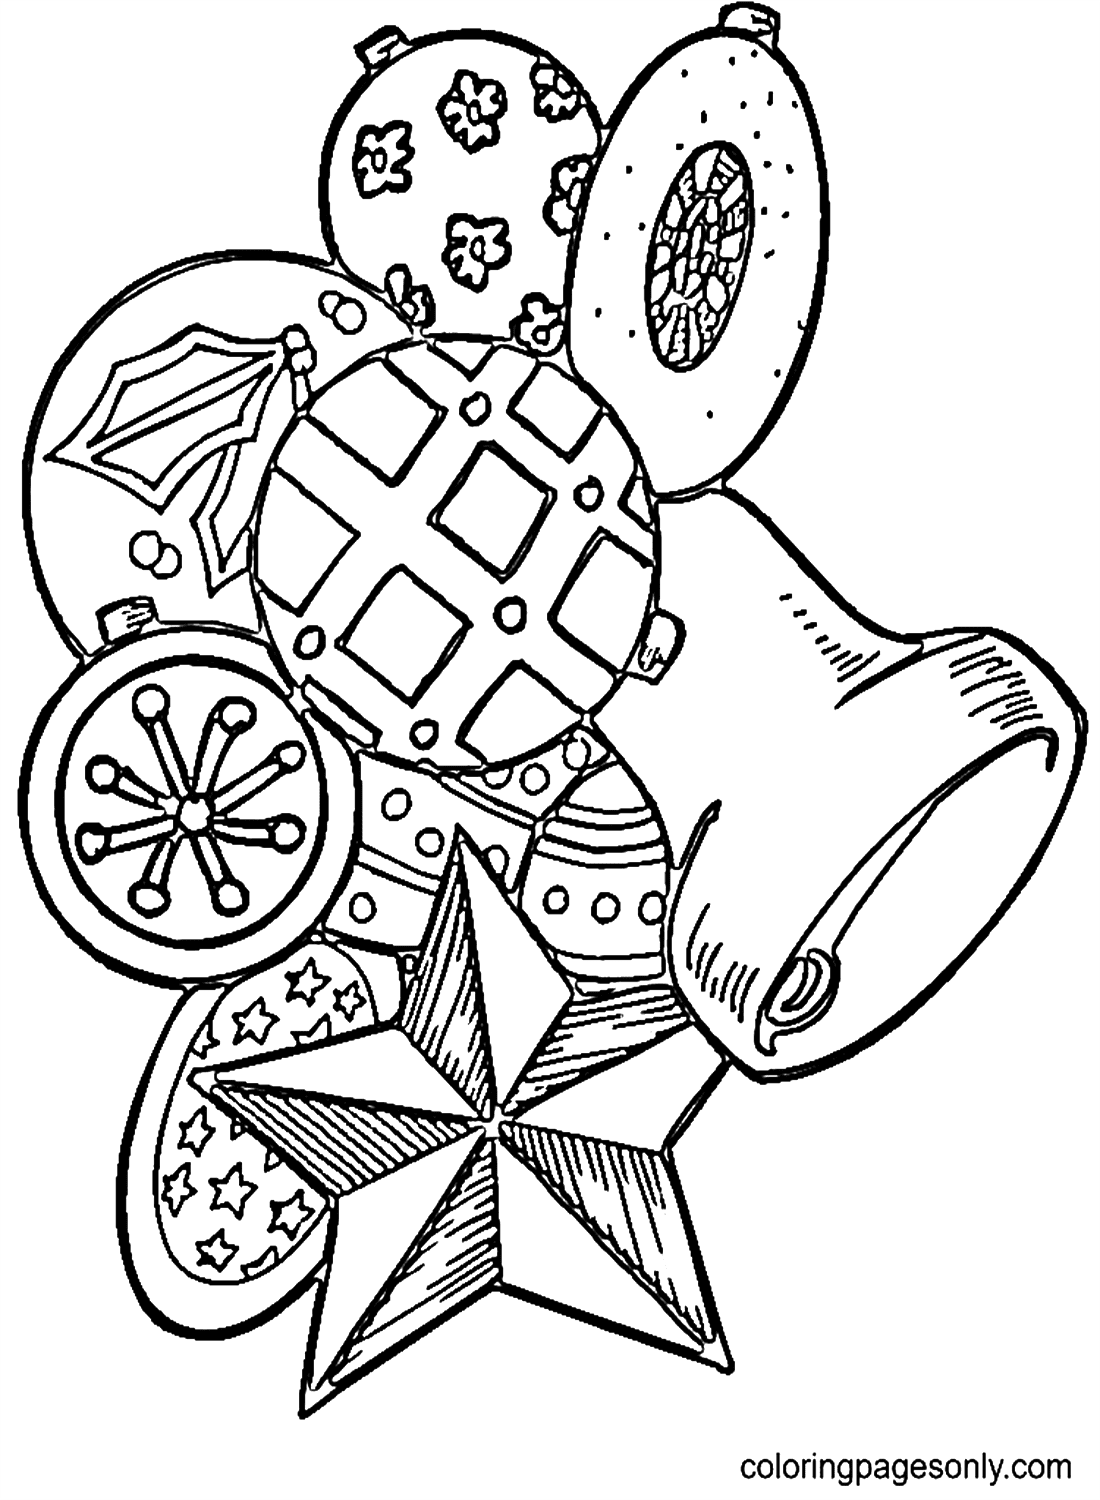 Toys For Christmas Coloring Pages